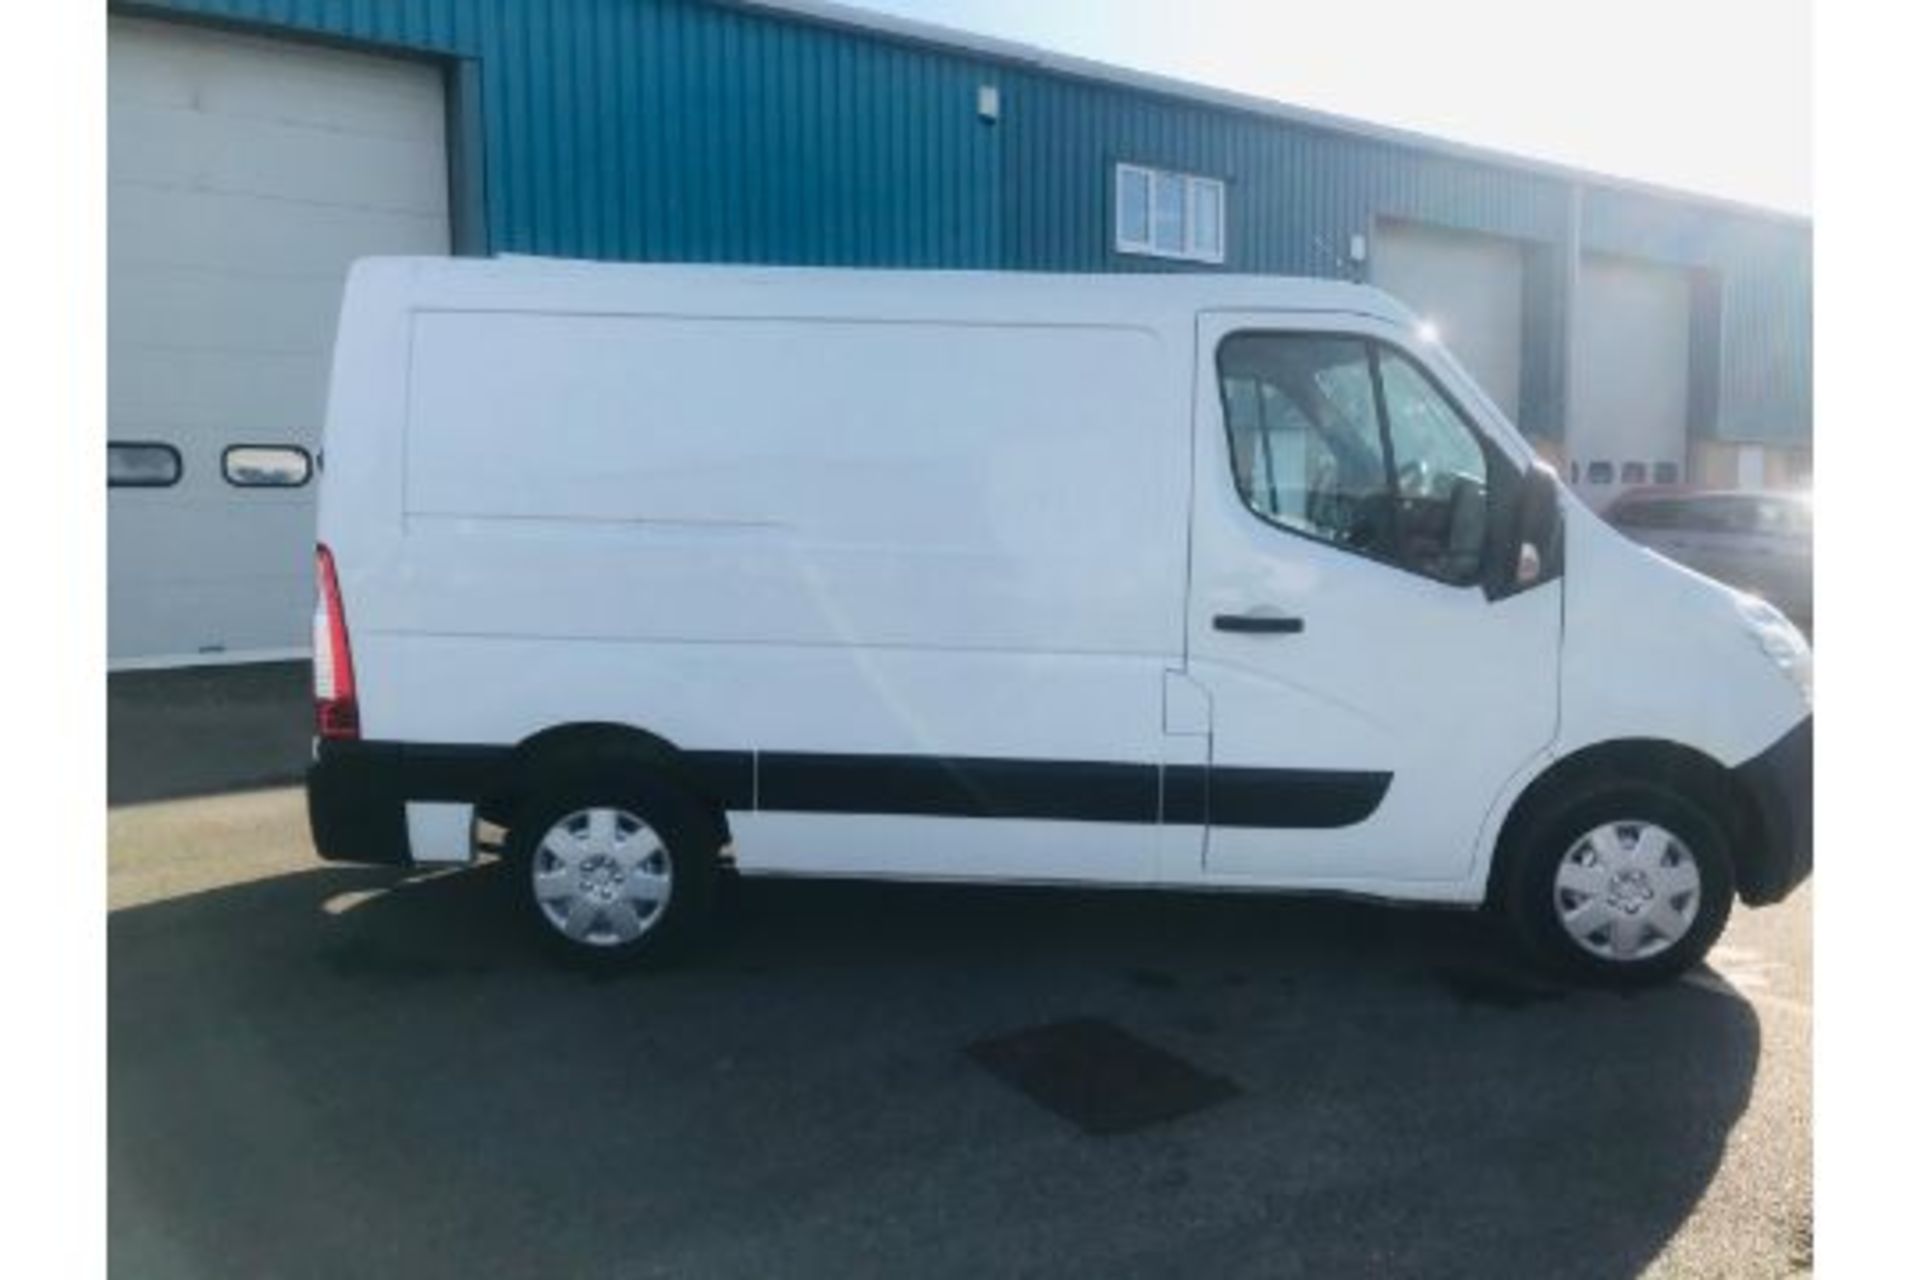 Vauxhall Movano F2800 2.3 CDTI - 2017 17 Reg - Air Con - 1 Keeper From New - Image 2 of 30